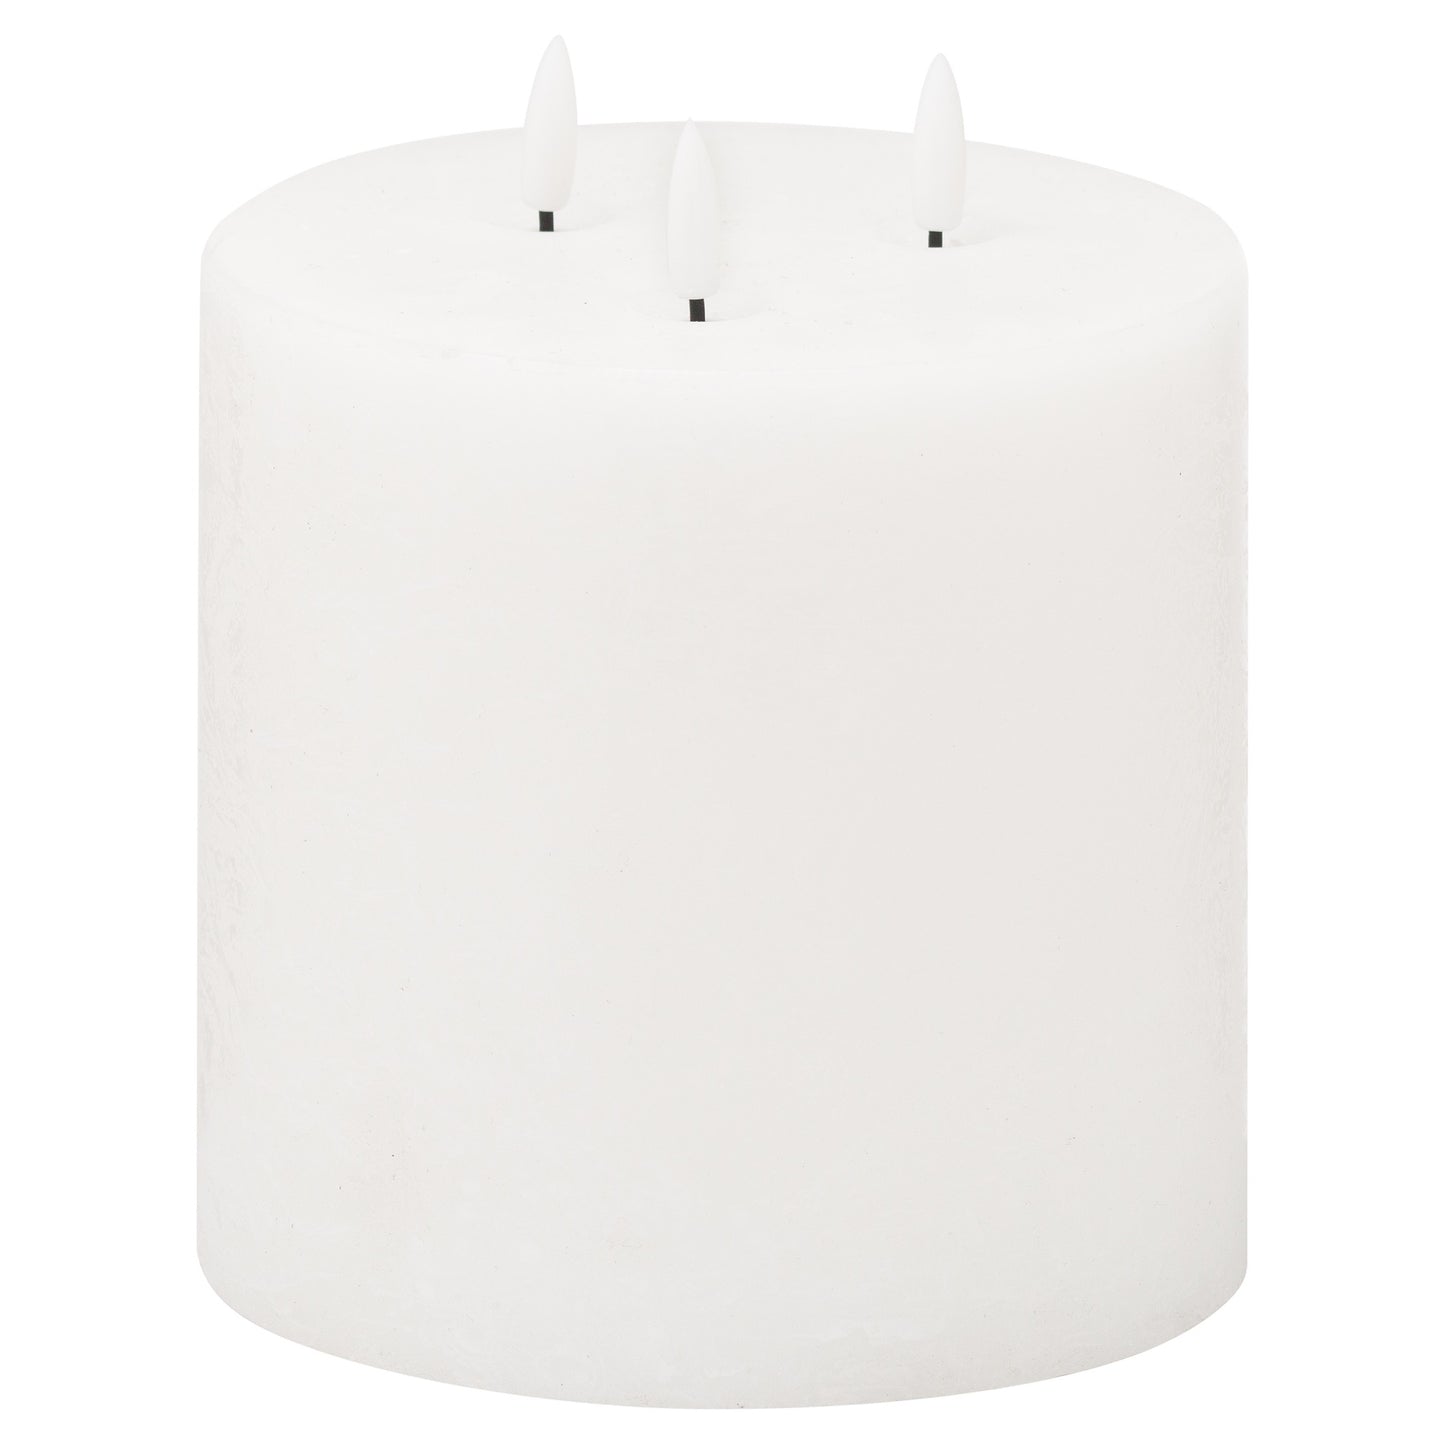 Luxe Collection Natural Glow 6x6 LED White Candle